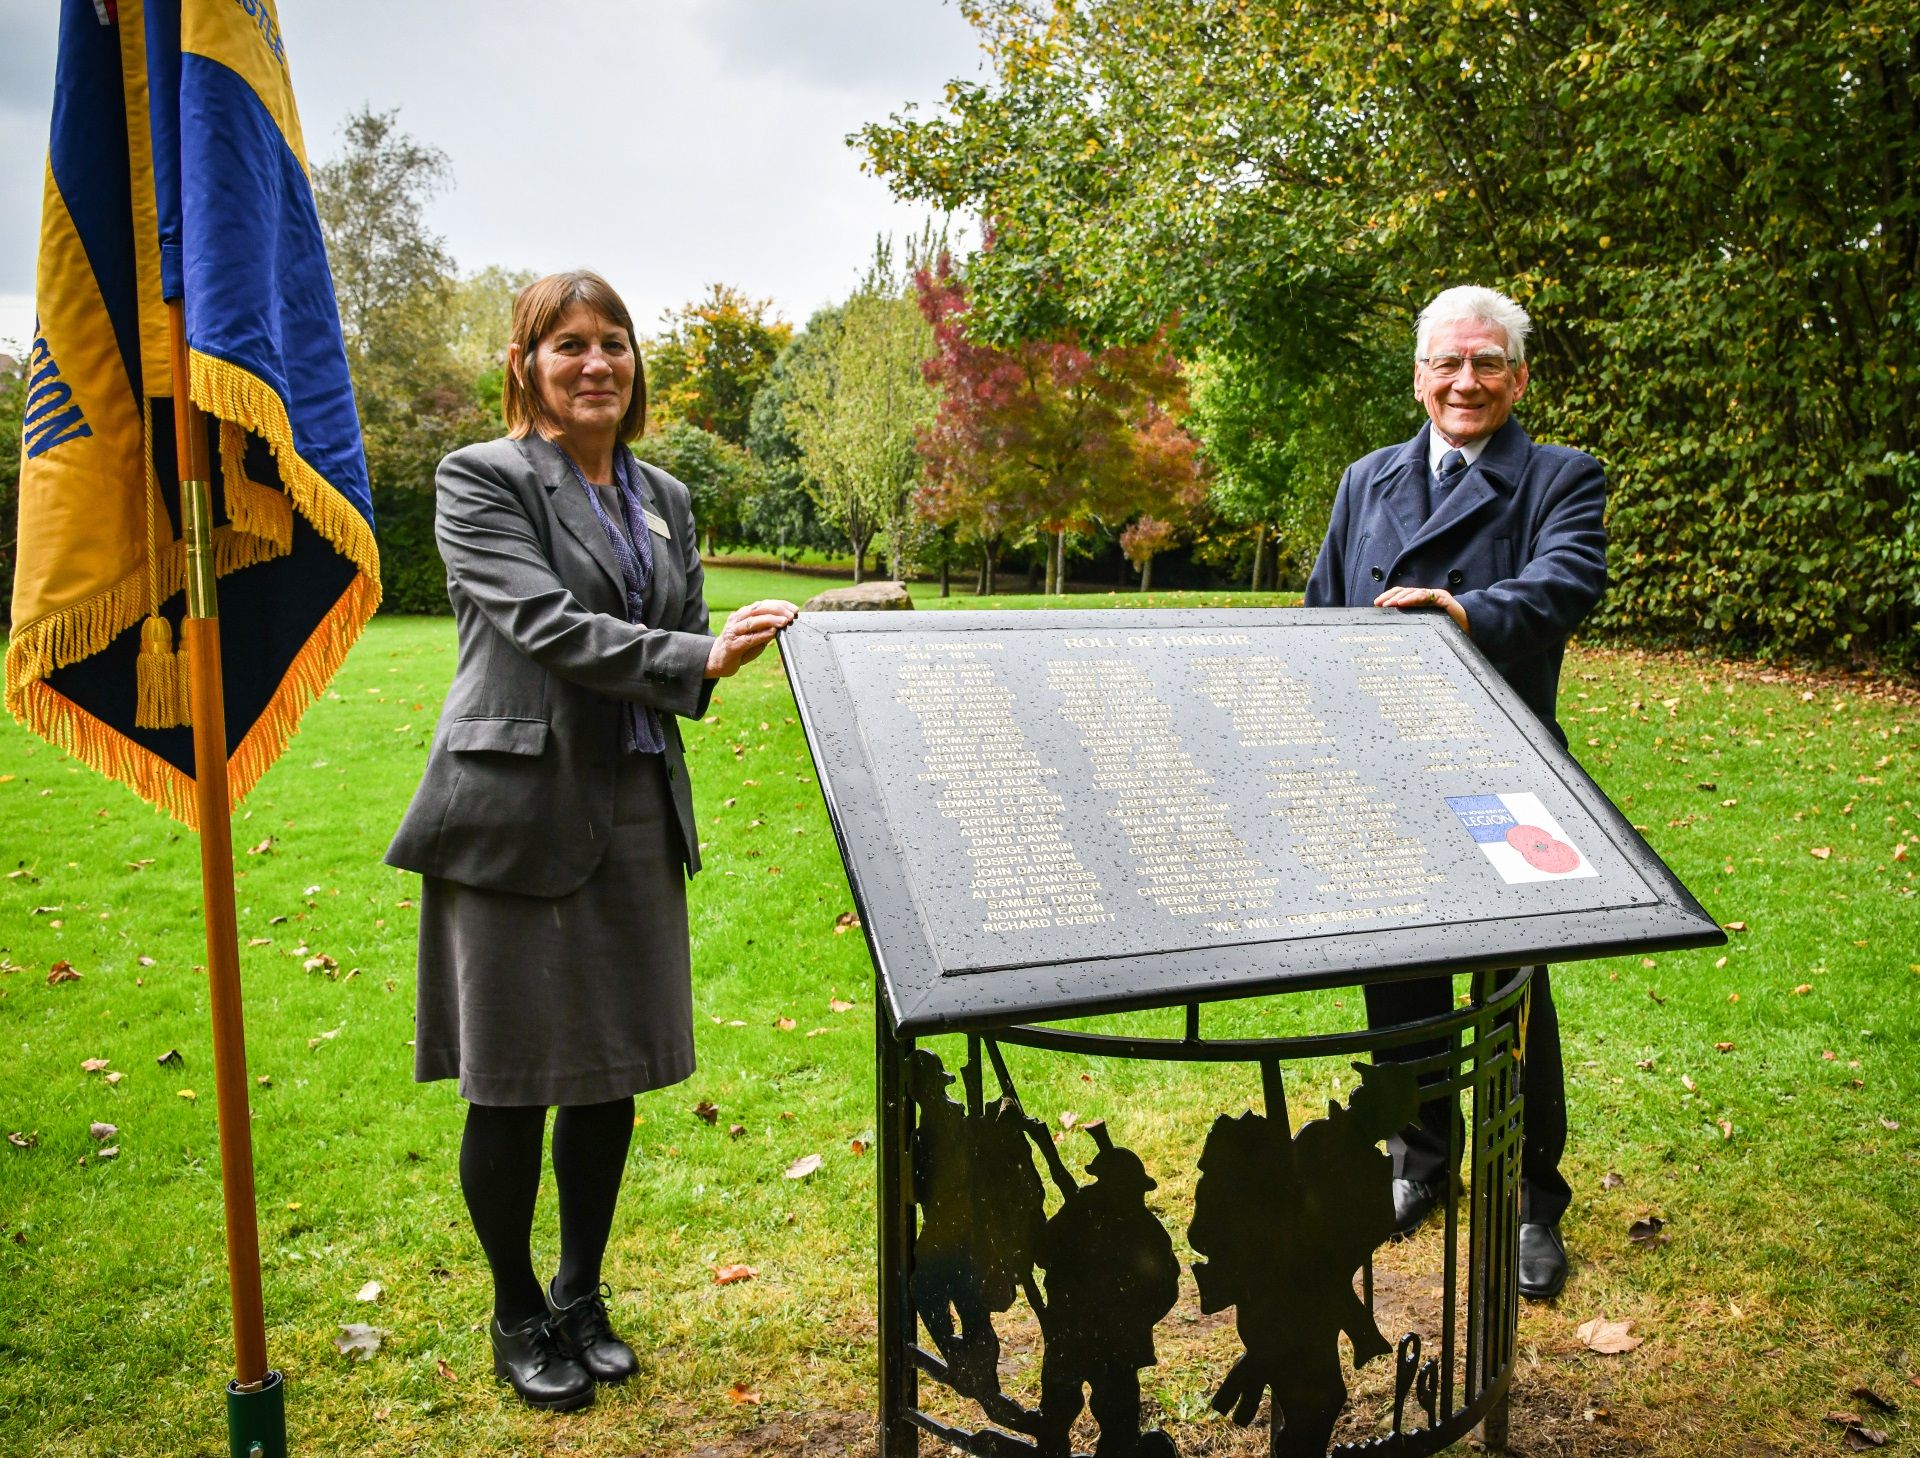 Memorial project paying tribute to townsfolk killed in the two world wars completed